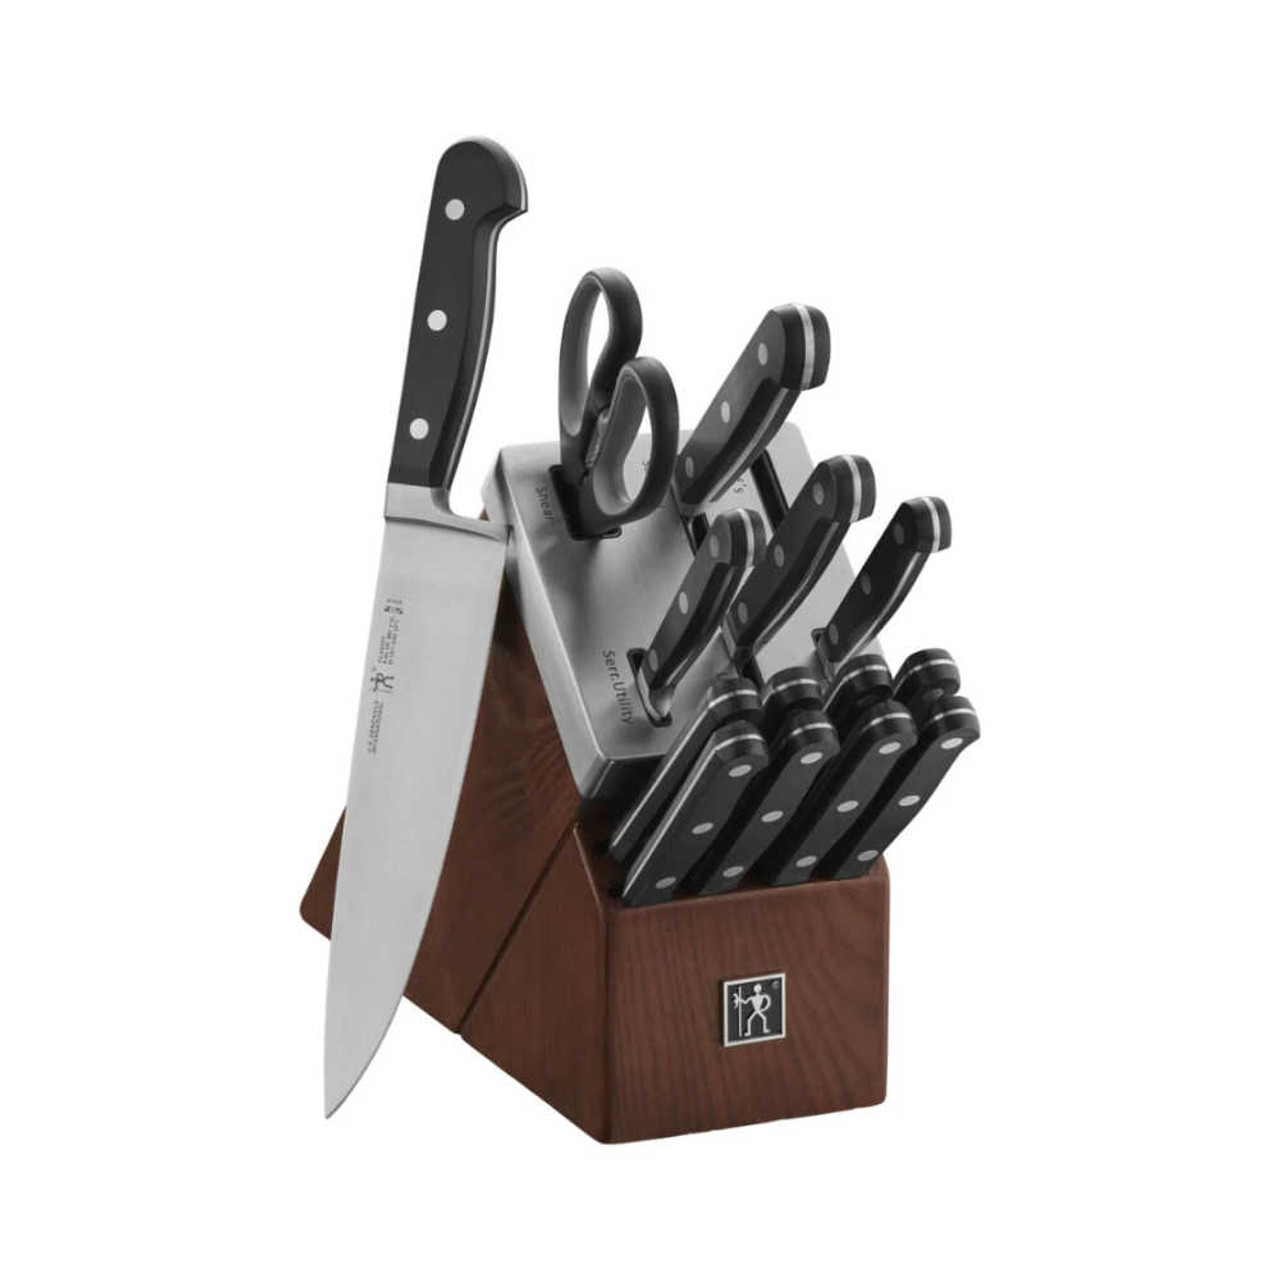 https://cdn11.bigcommerce.com/s-hccytny0od/images/stencil/1280x1280/products/5172/22352/Henckels_Classic_15-Piece_Self-Sharpening_Knife_Block_Set__83043.1668889572.jpg?c=2?imbypass=on